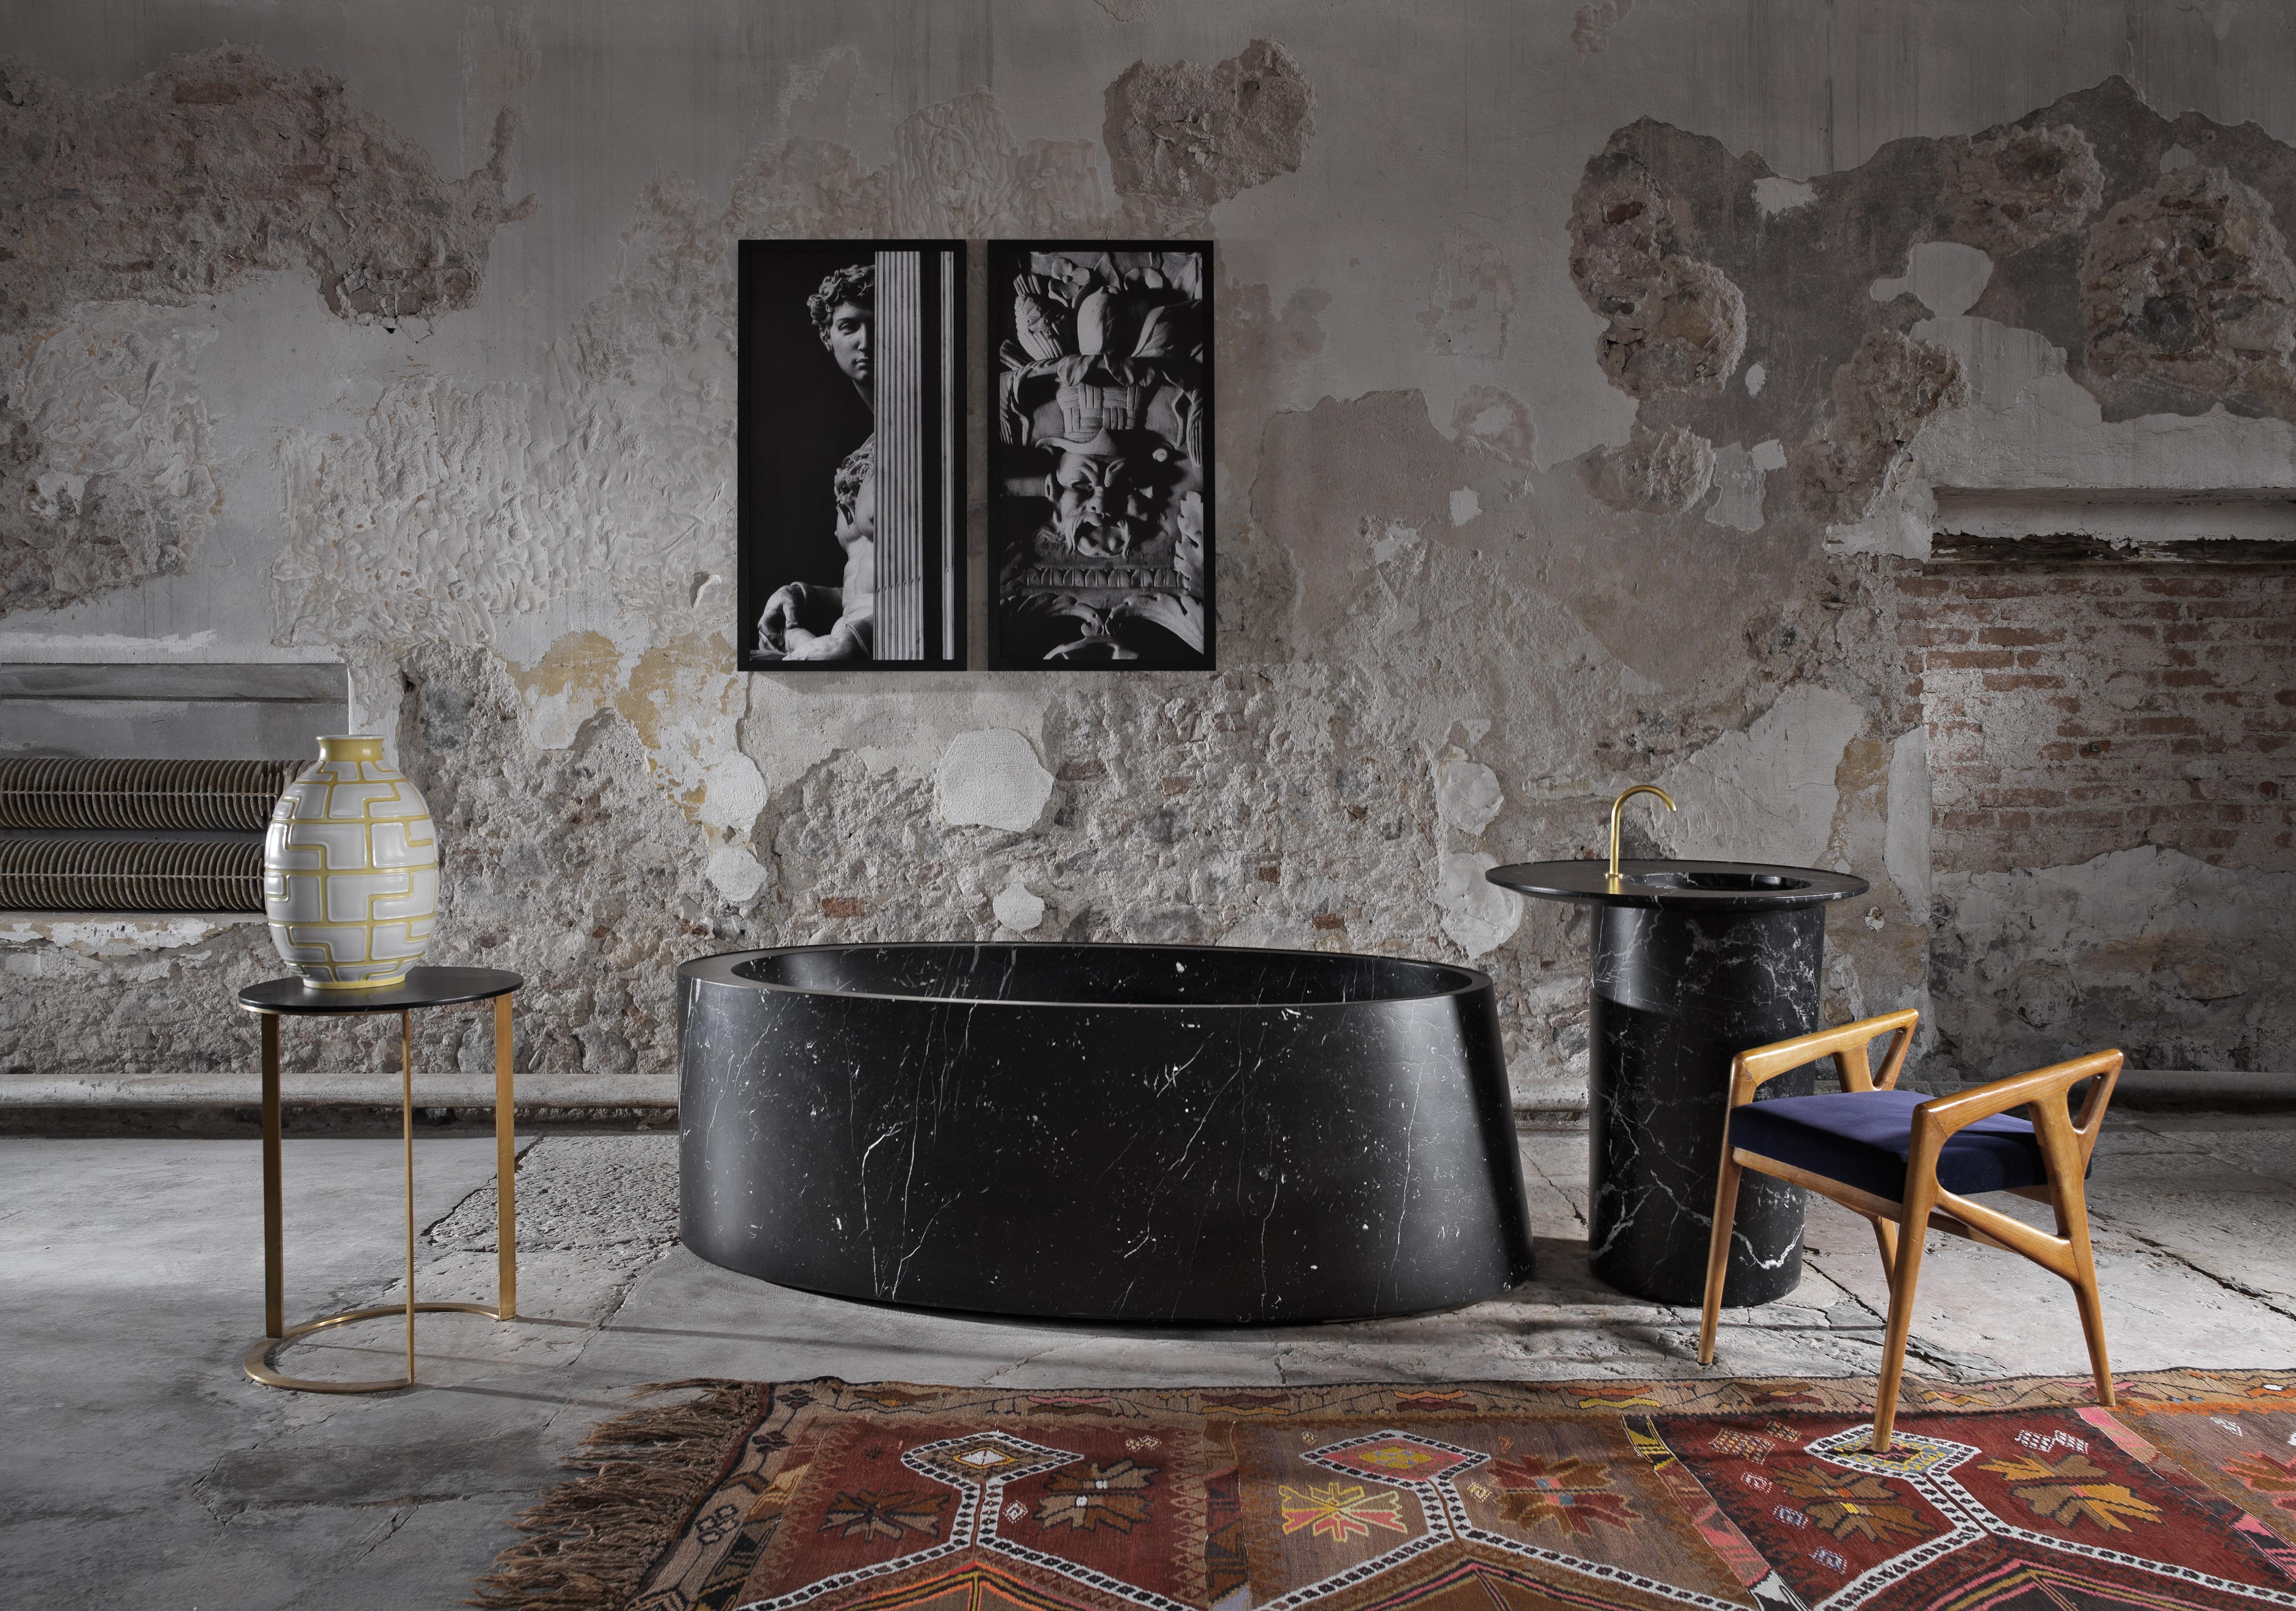 Desco Collection is the results of renewed collaboration between Pibamarmi and the designer Vittorio Longheu. 
This work is defined by a peculiar set of elements, strongly characterized by circular shapes and minimal asymmetries in the volumes. The